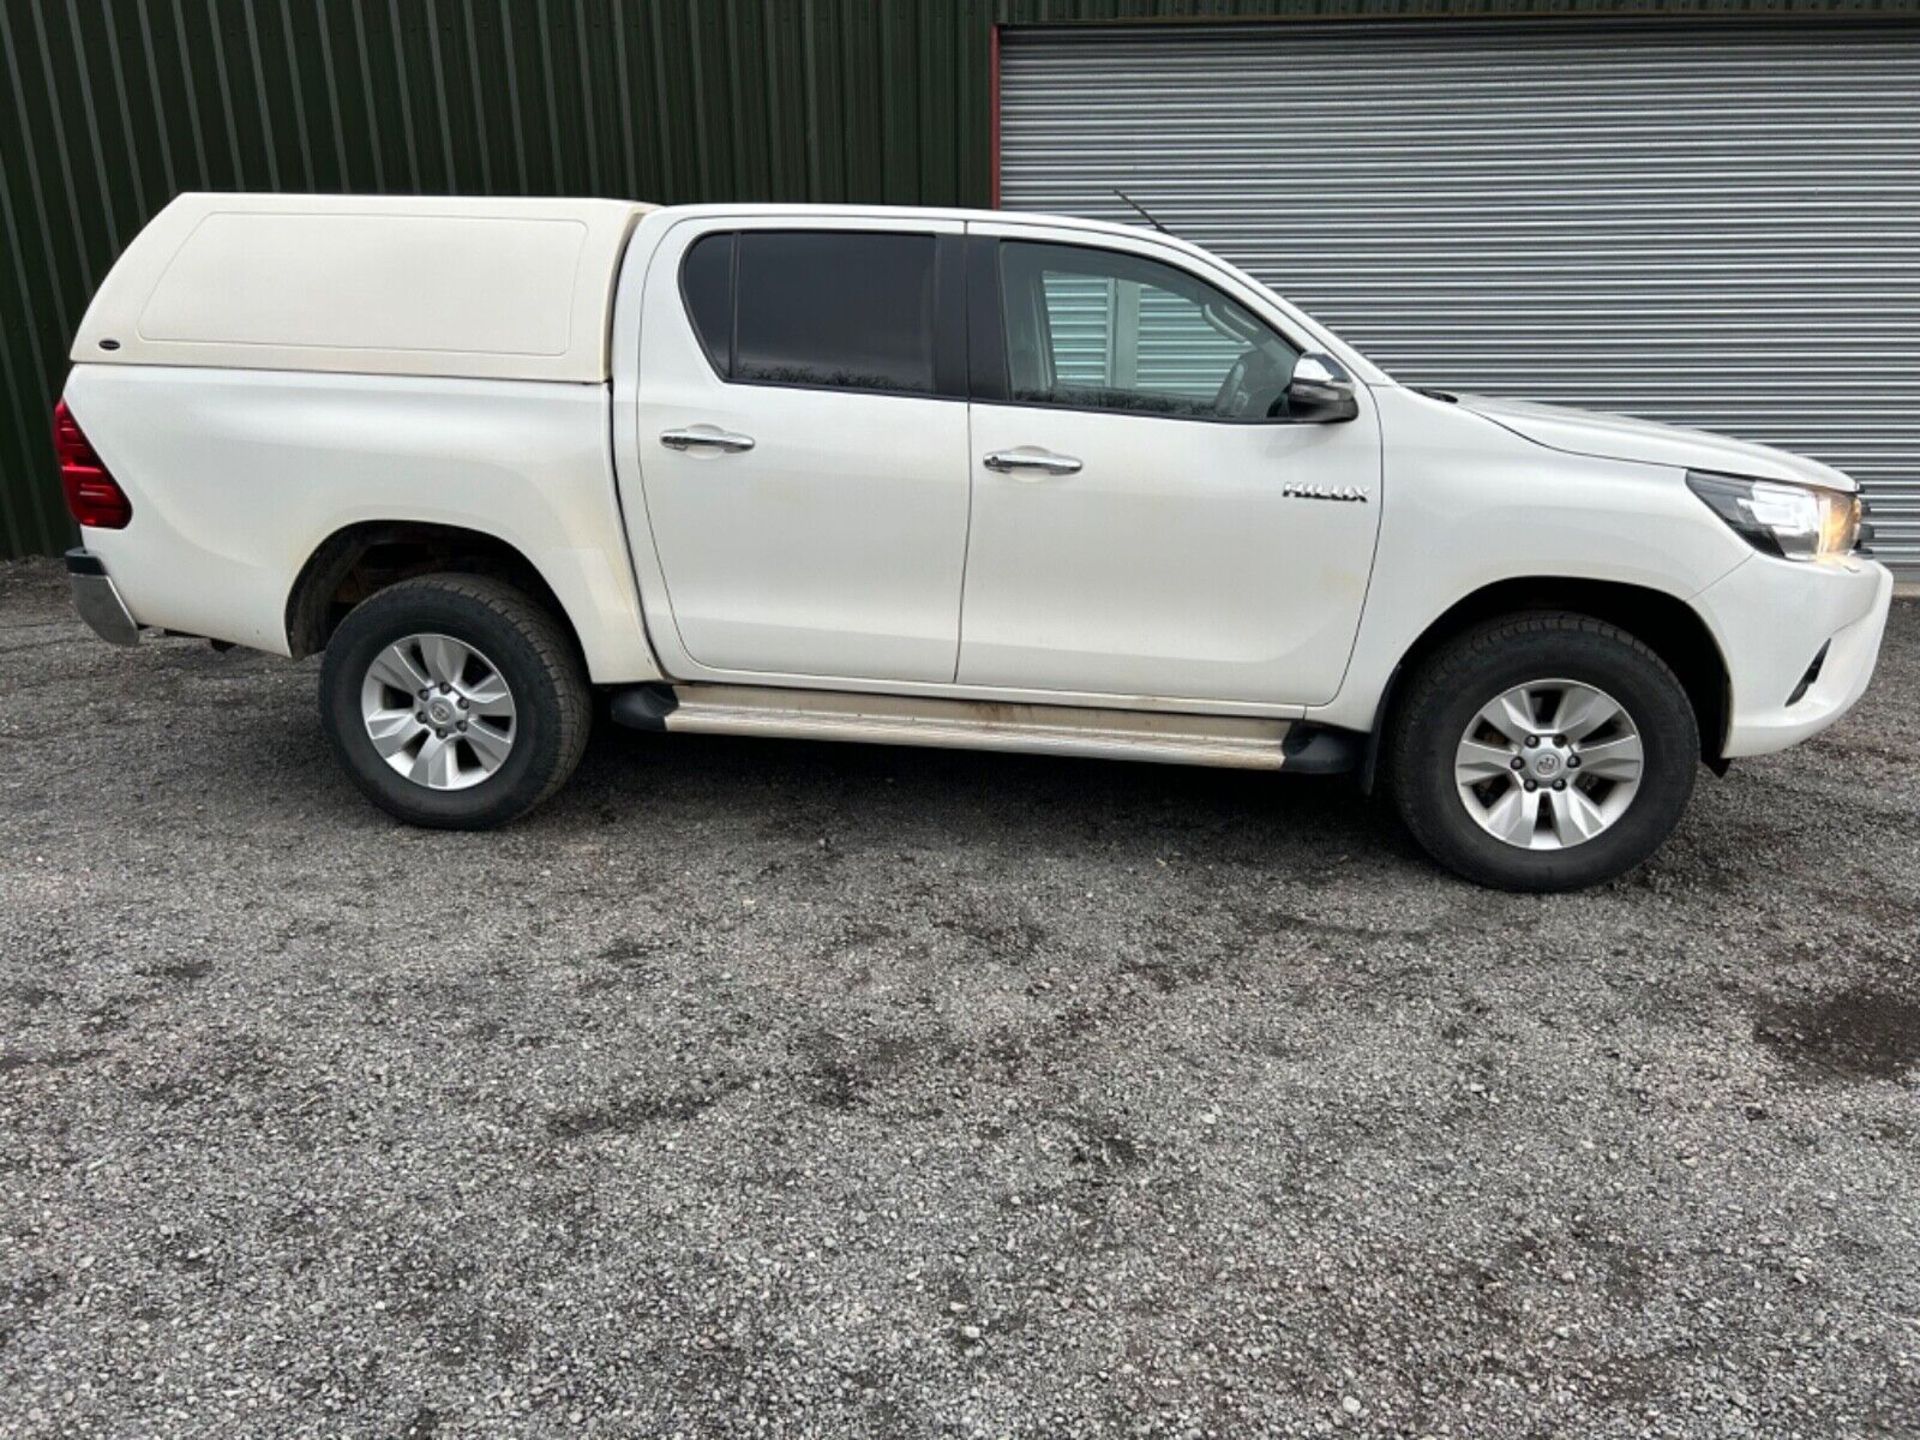 2018 TOYOTA HILUX DOUBLE CAB PICKUP TRUCK 4X4 AIRCON TWIN CAB TRUCKMAN CANOPY - Image 6 of 15